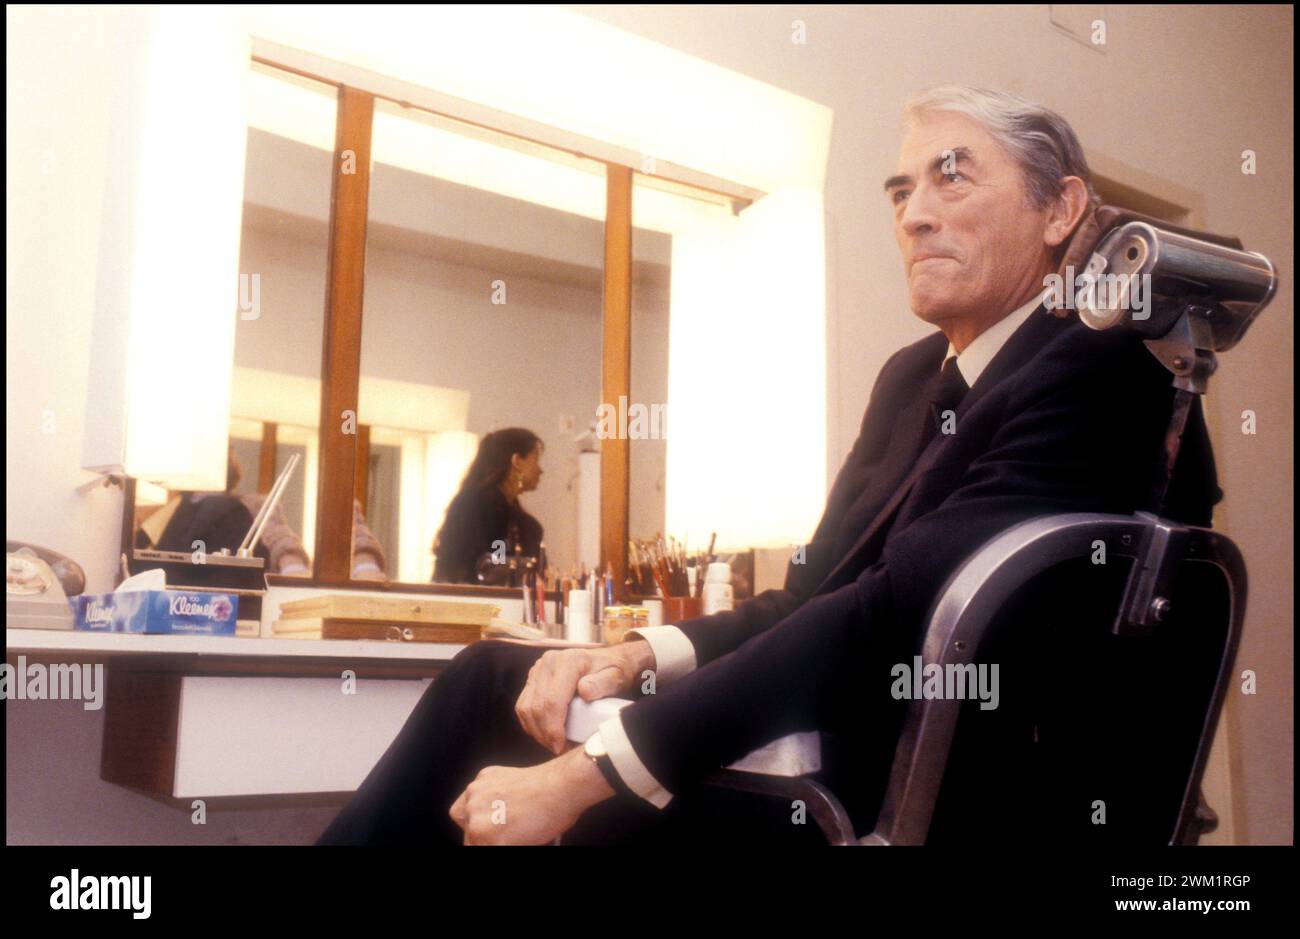 MME4713053 Actor GREGORY PECK, 1983/GREGORY PECK, attore, 1983; (add.info.: Actor GREGORY PECK, 1983/GREGORY PECK, attore, 1983); © Marcello Mencarini. All rights reserved 2024. Stock Photo